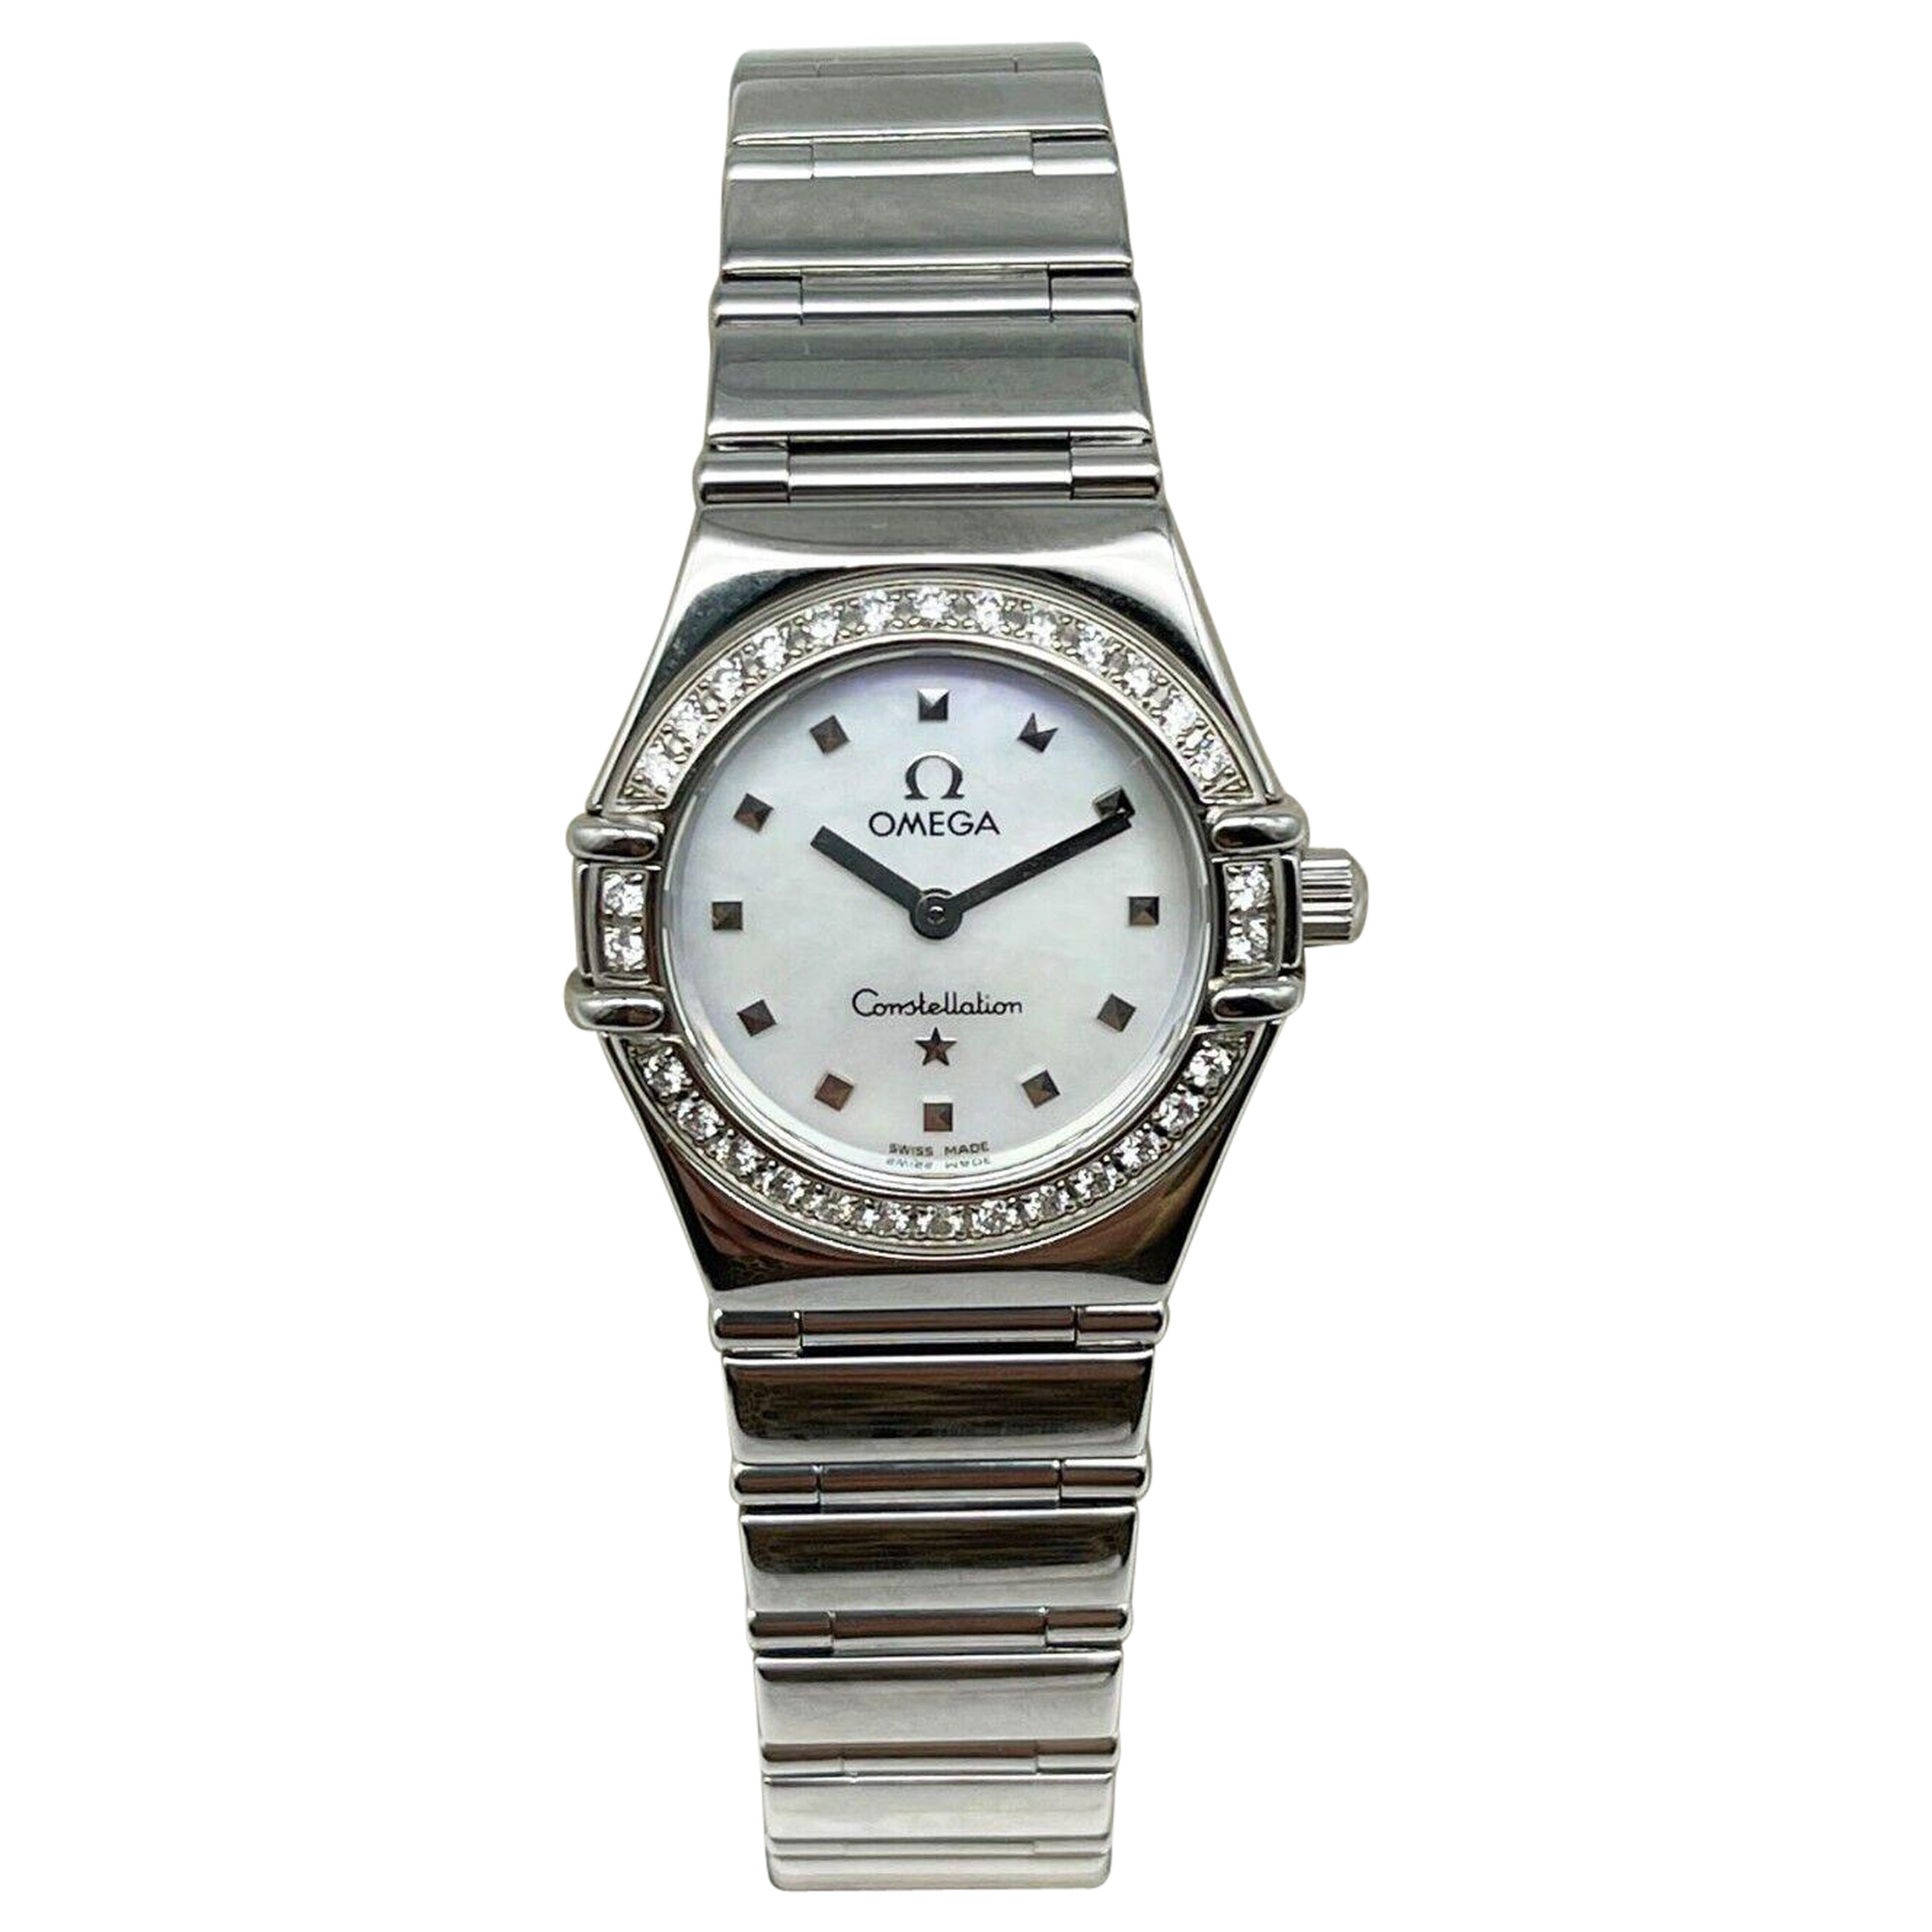 Omega Constellation 1512 30 00 Stainless Steel Ladies Watch At 1stdibs